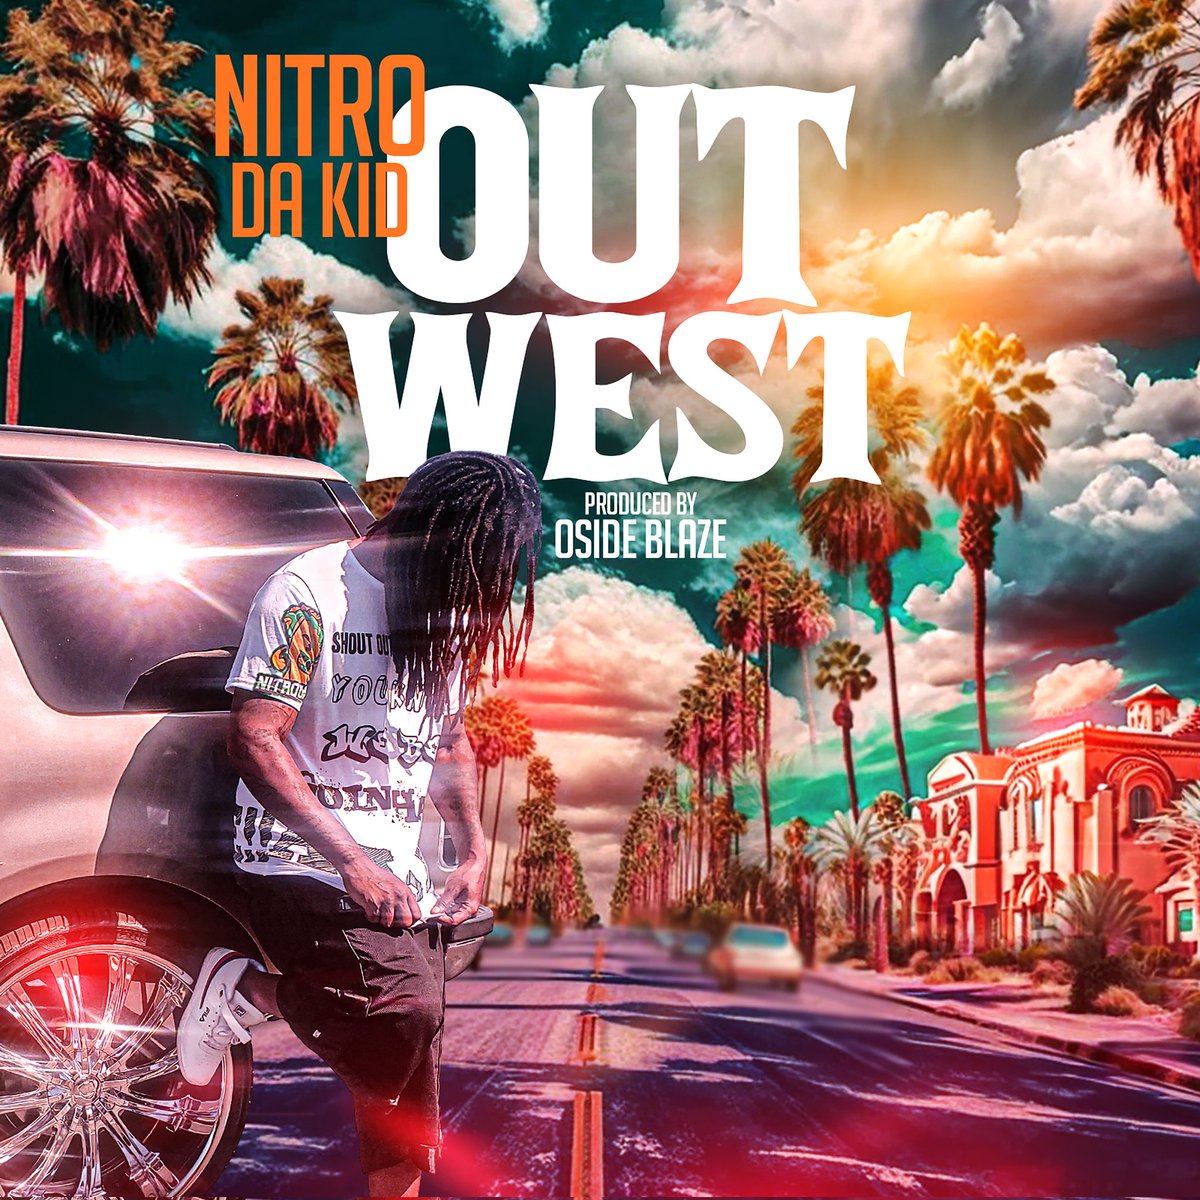 🚨🚨🚨 My New song OUT WEST is out now on all streaming platforms! Produced by @Blaze76o West coast Vibes let me know what yall think #OutWest #NewMusic #NewSong #OutNow #AllStreamingPlatforms #NitroDaKid #WestCoast #Vibes #MoreFire #SponsoredBy #ZombieFresh